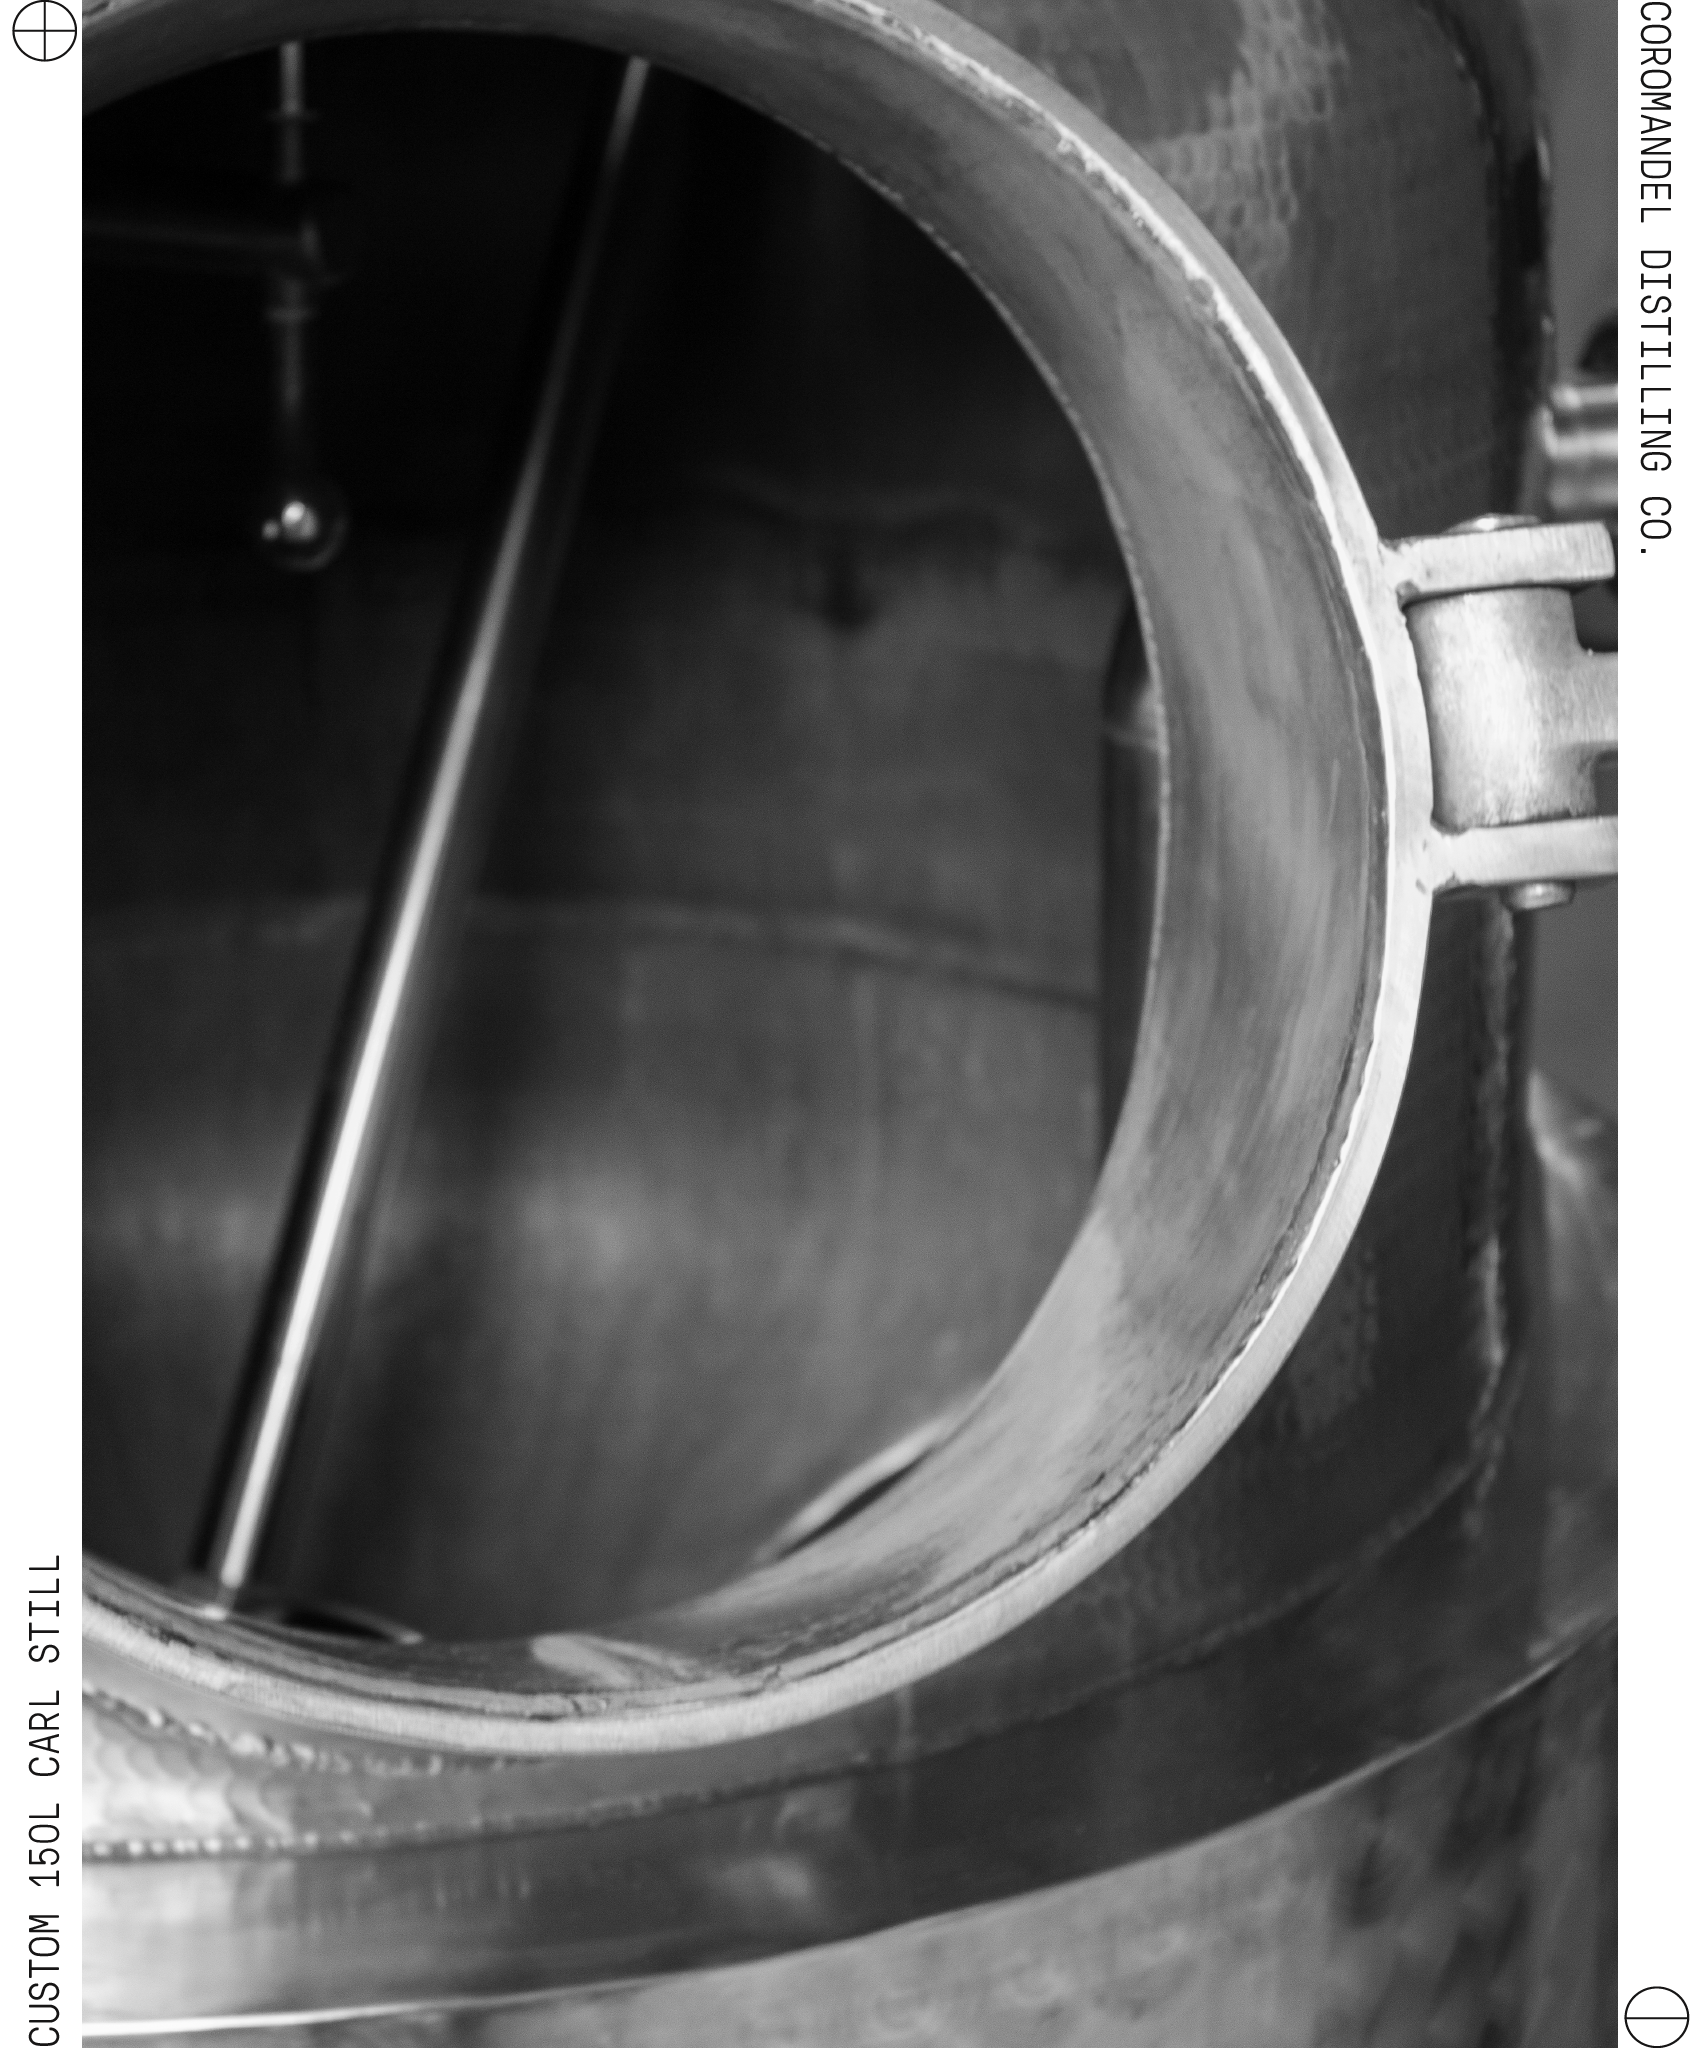 A view into the pot of our gin still where New Zealand's finest gins are made